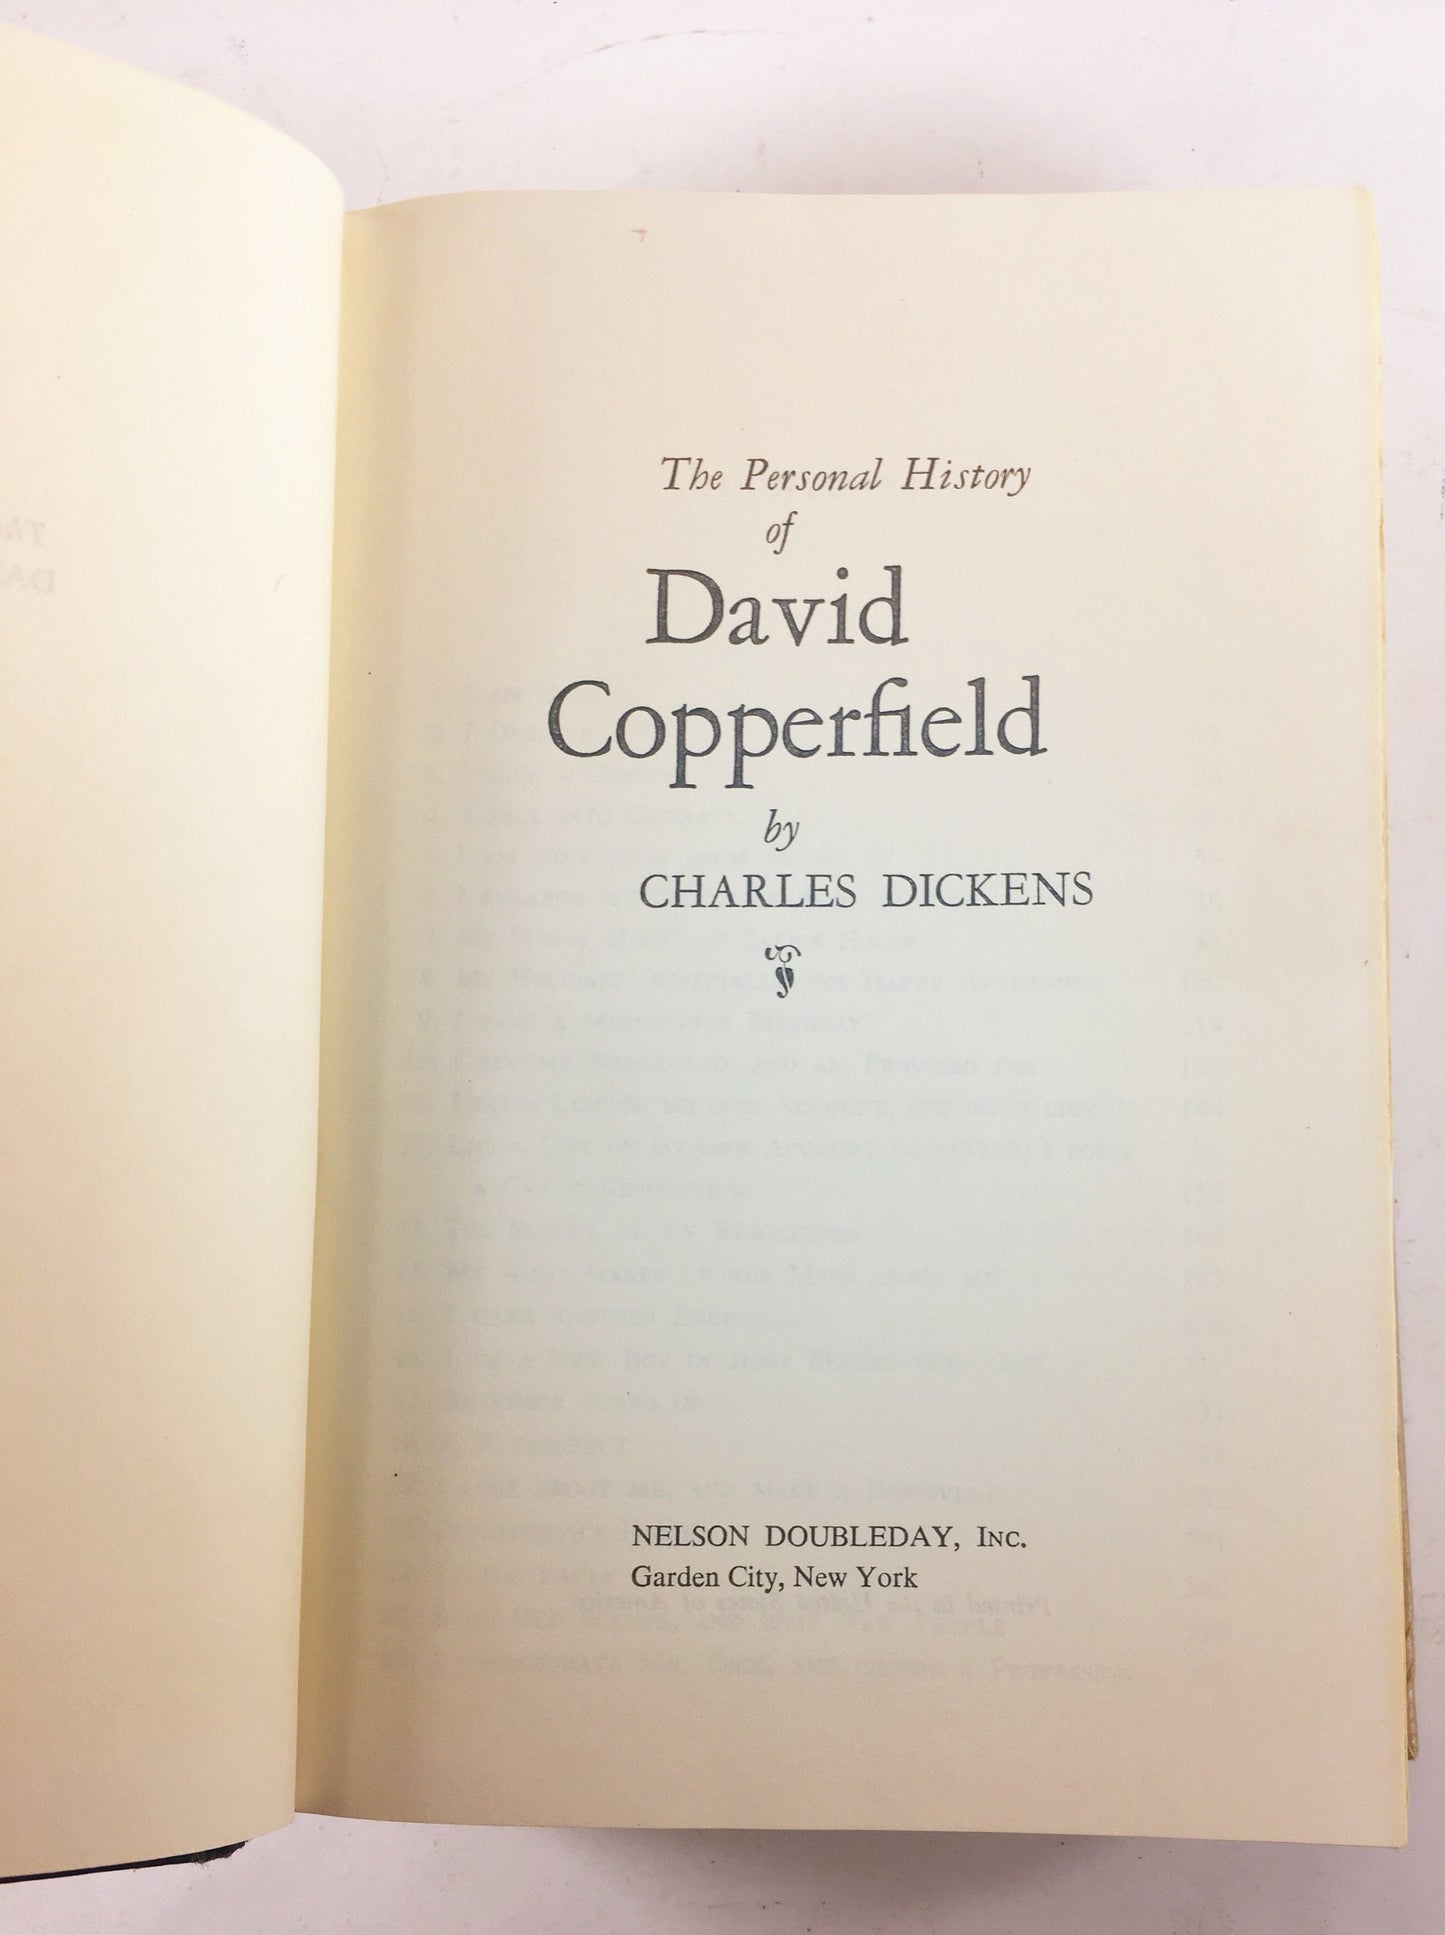 David Copperfield Vintage book by Charles Dickens circa 1970. Nelson Doubleday Beautiful edition! decor gift